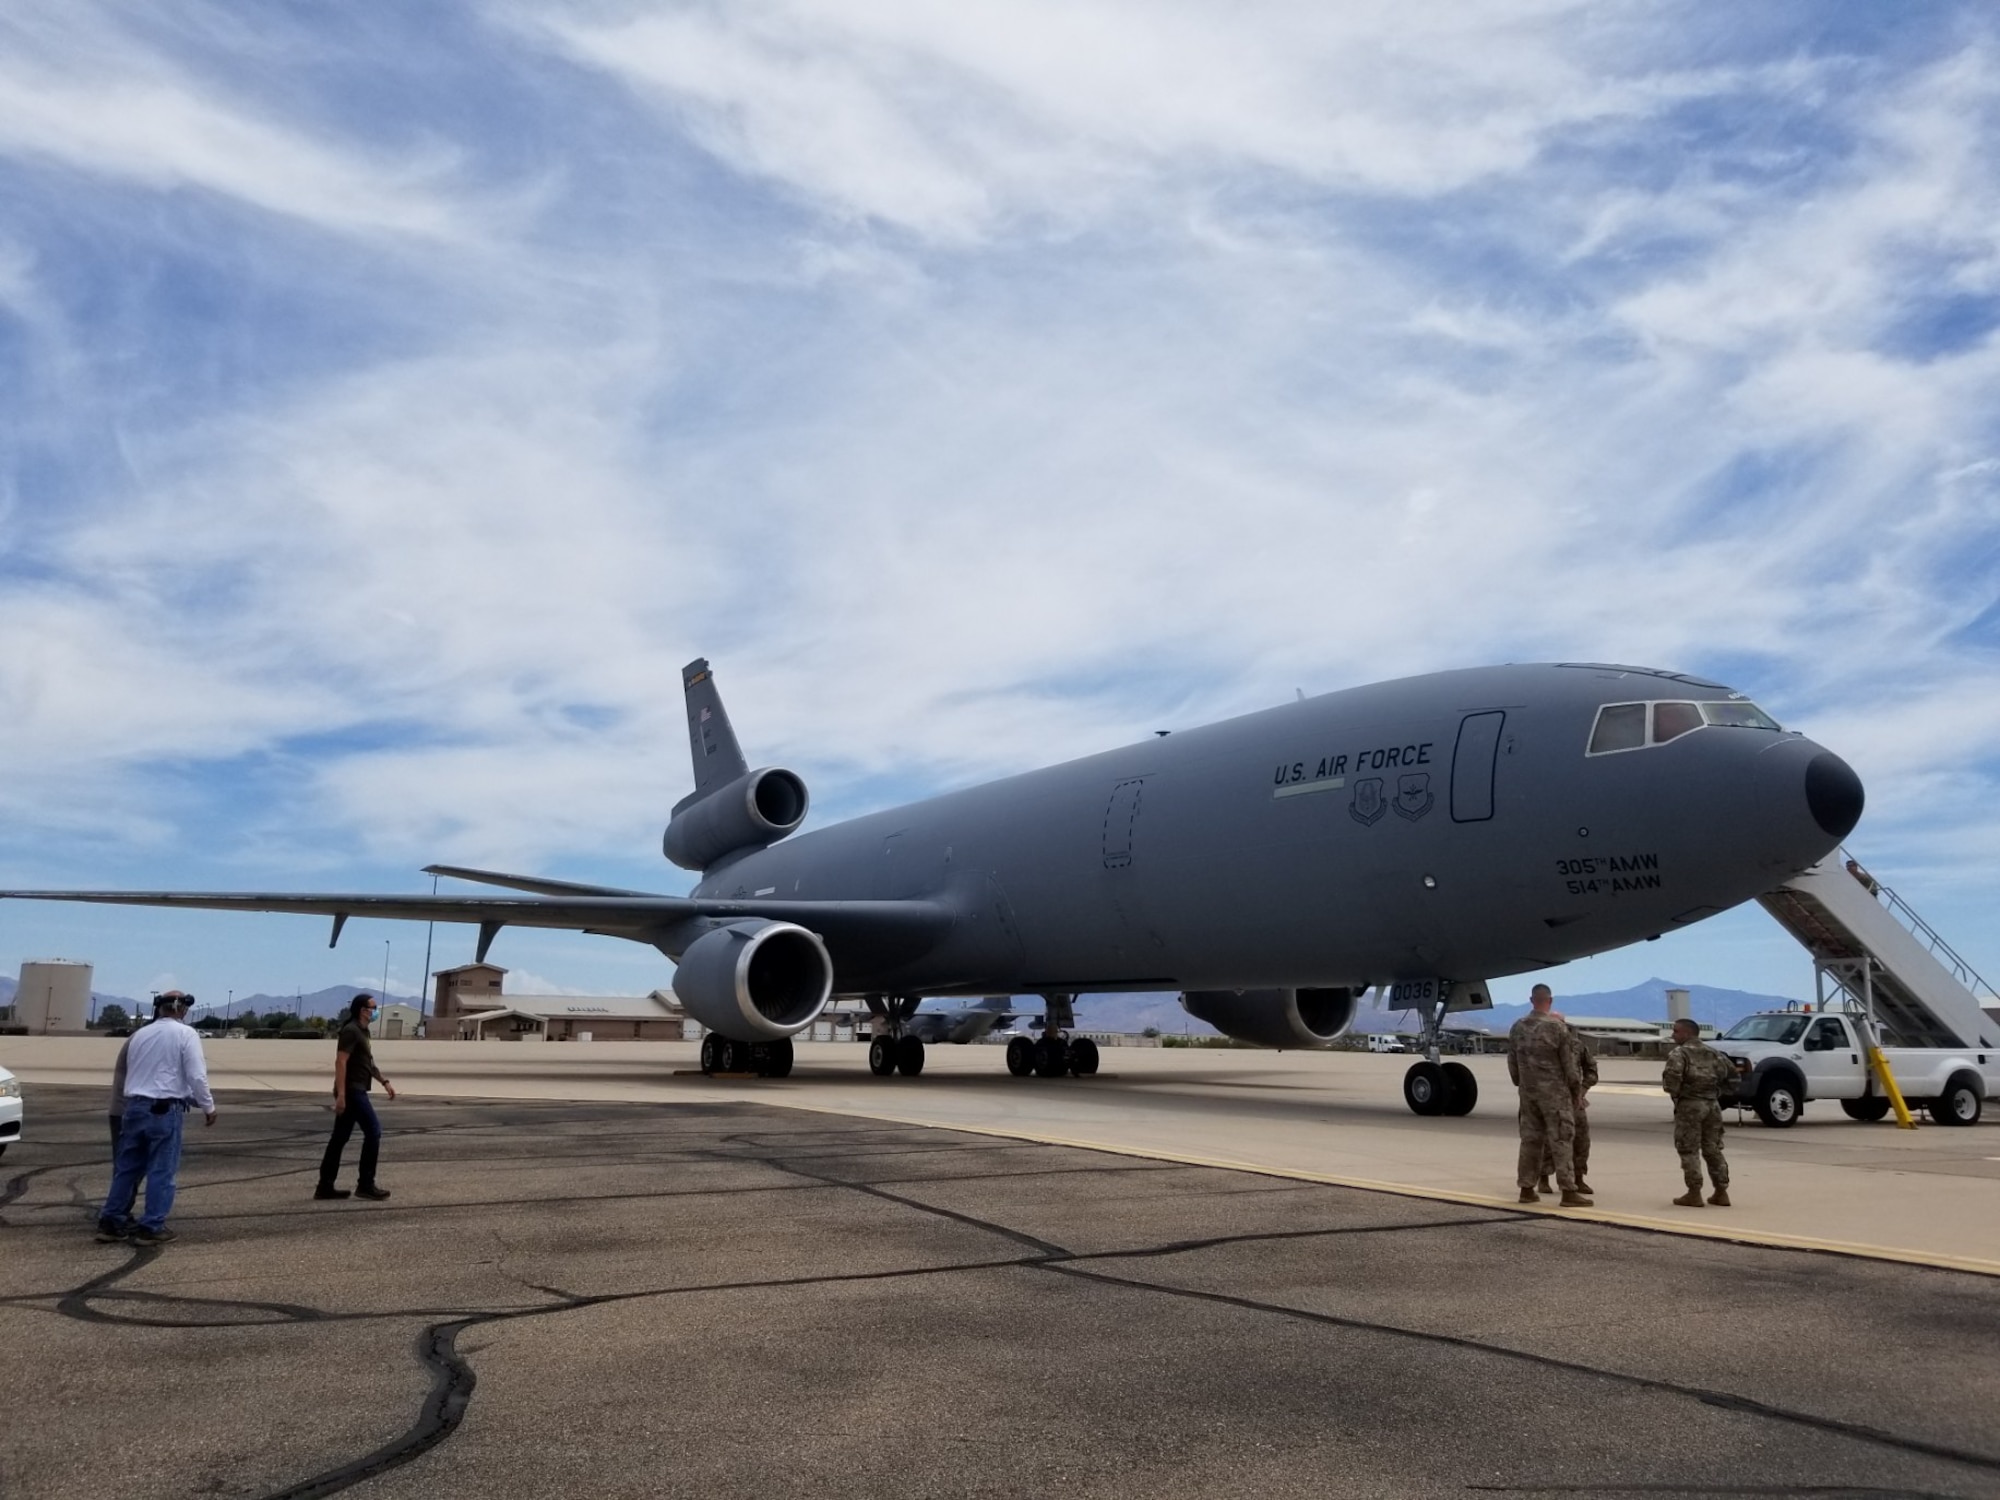 A KC-10 from the 305th Air Mobility Wing at Joint Base McGuire-Dix-Lakehurst, New Jersey, landed at Davis-Monthan Air Force Base, July 13, to begin the storage process at the 309th Aerospace Maintenance and Regeneration Group (AMARG) on base. (Courtesy photo)